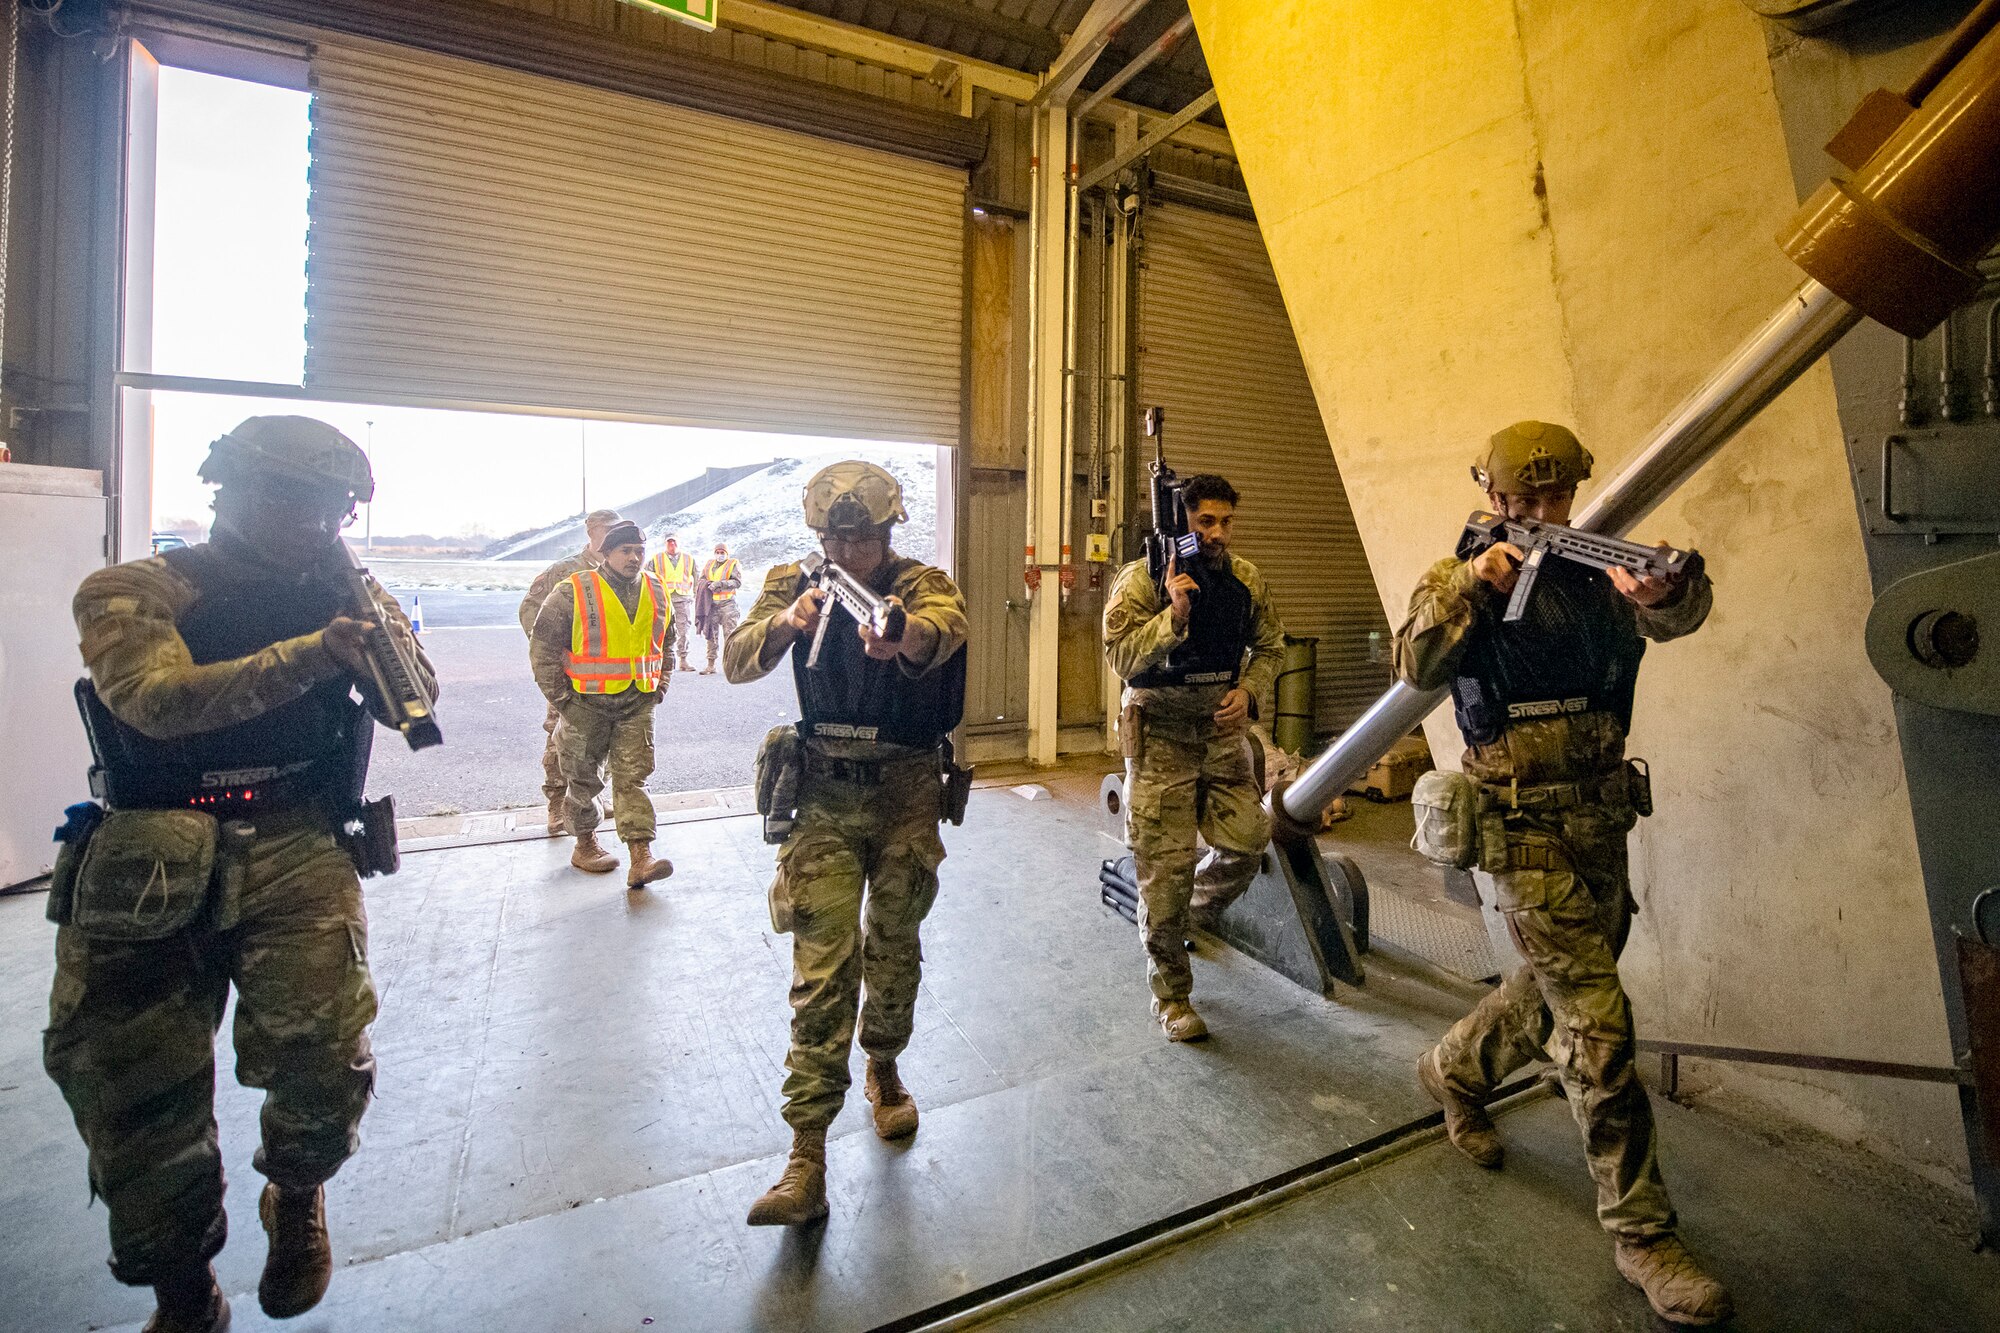 Airmen from the 423d Security Forces Squadron perform a building sweep during an active shooter exercise at RAF Molesworth, England, Dec. 16, 2022. The 423d SFS and Medical Squadrons conducted the exercise to evaluate their overall readiness and response capabilities to an emergency situation. (U.S. Air Force photo by Staff Sgt. Eugene Oliver)